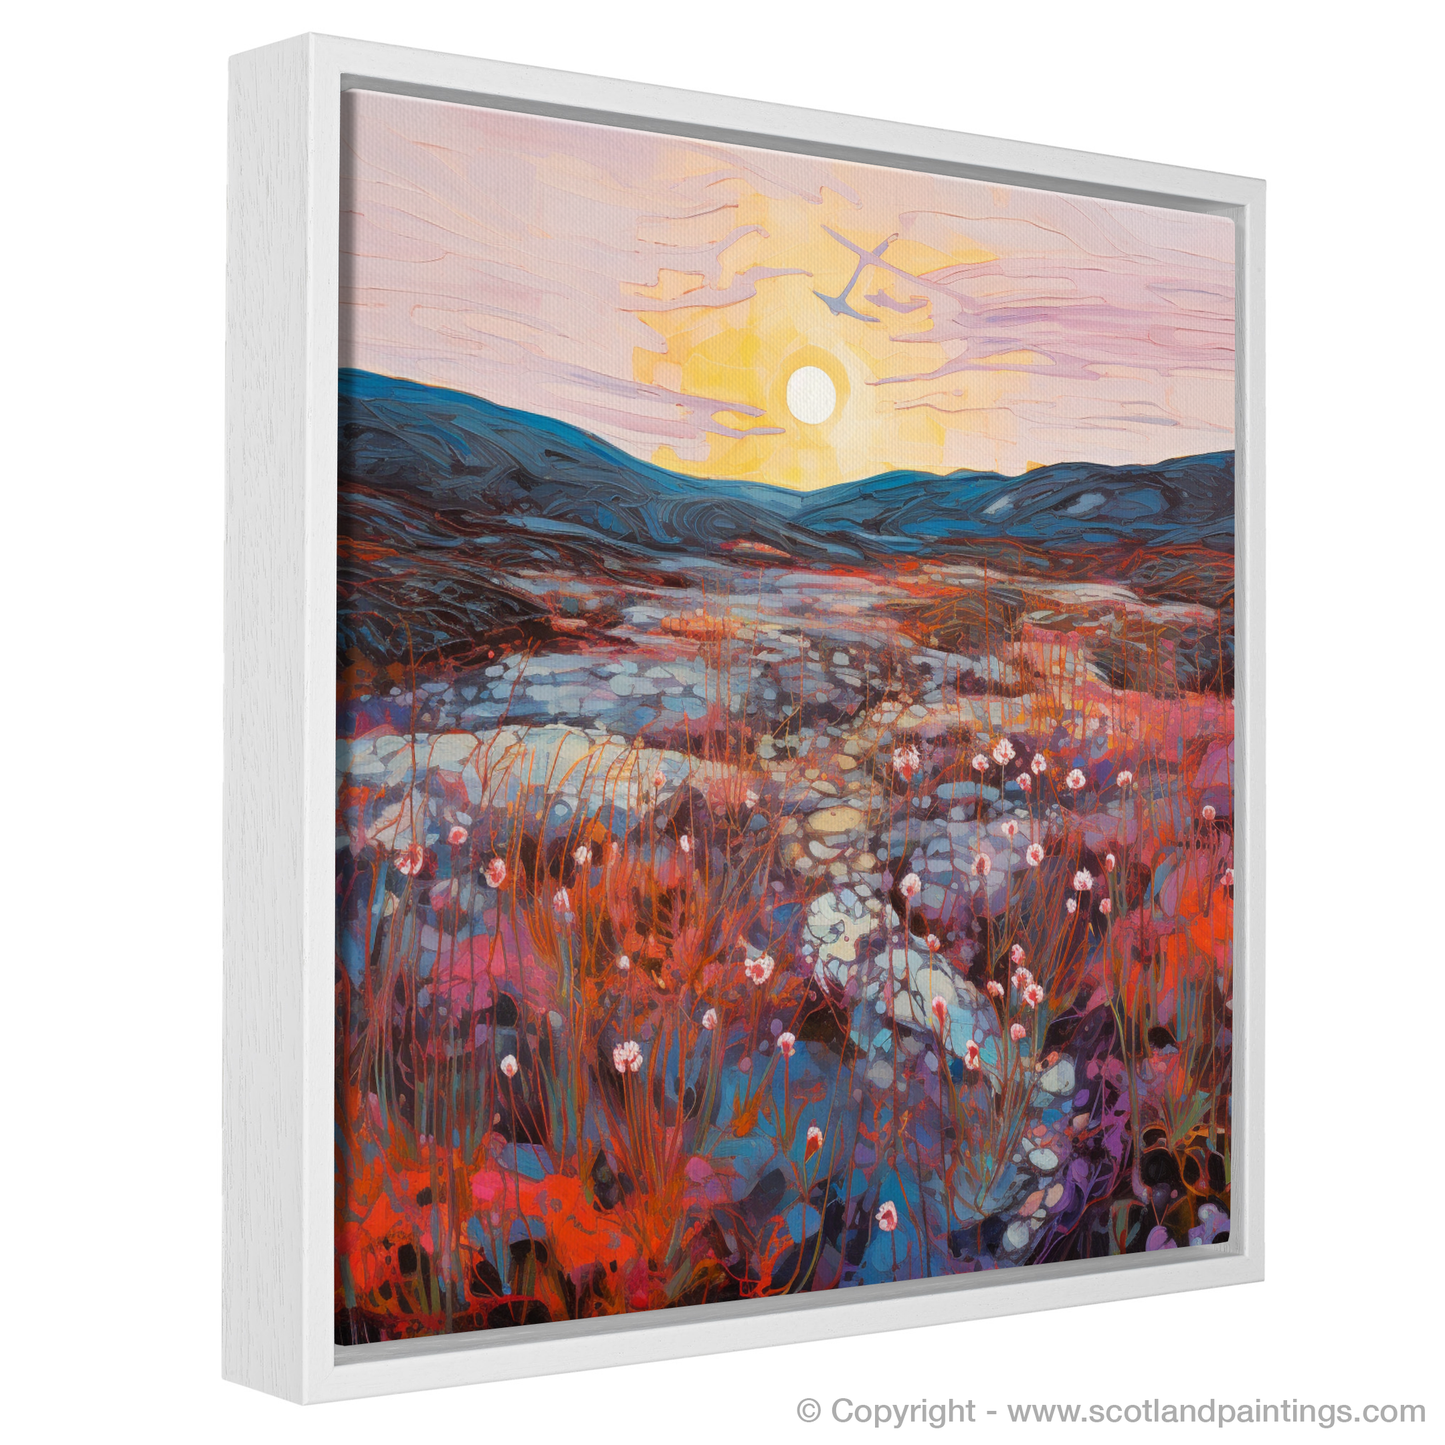 Painting and Art Print of Crowberry patches at dusk in Glencoe entitled "Twilight Dance of Crowberry Patches in Glencoe".